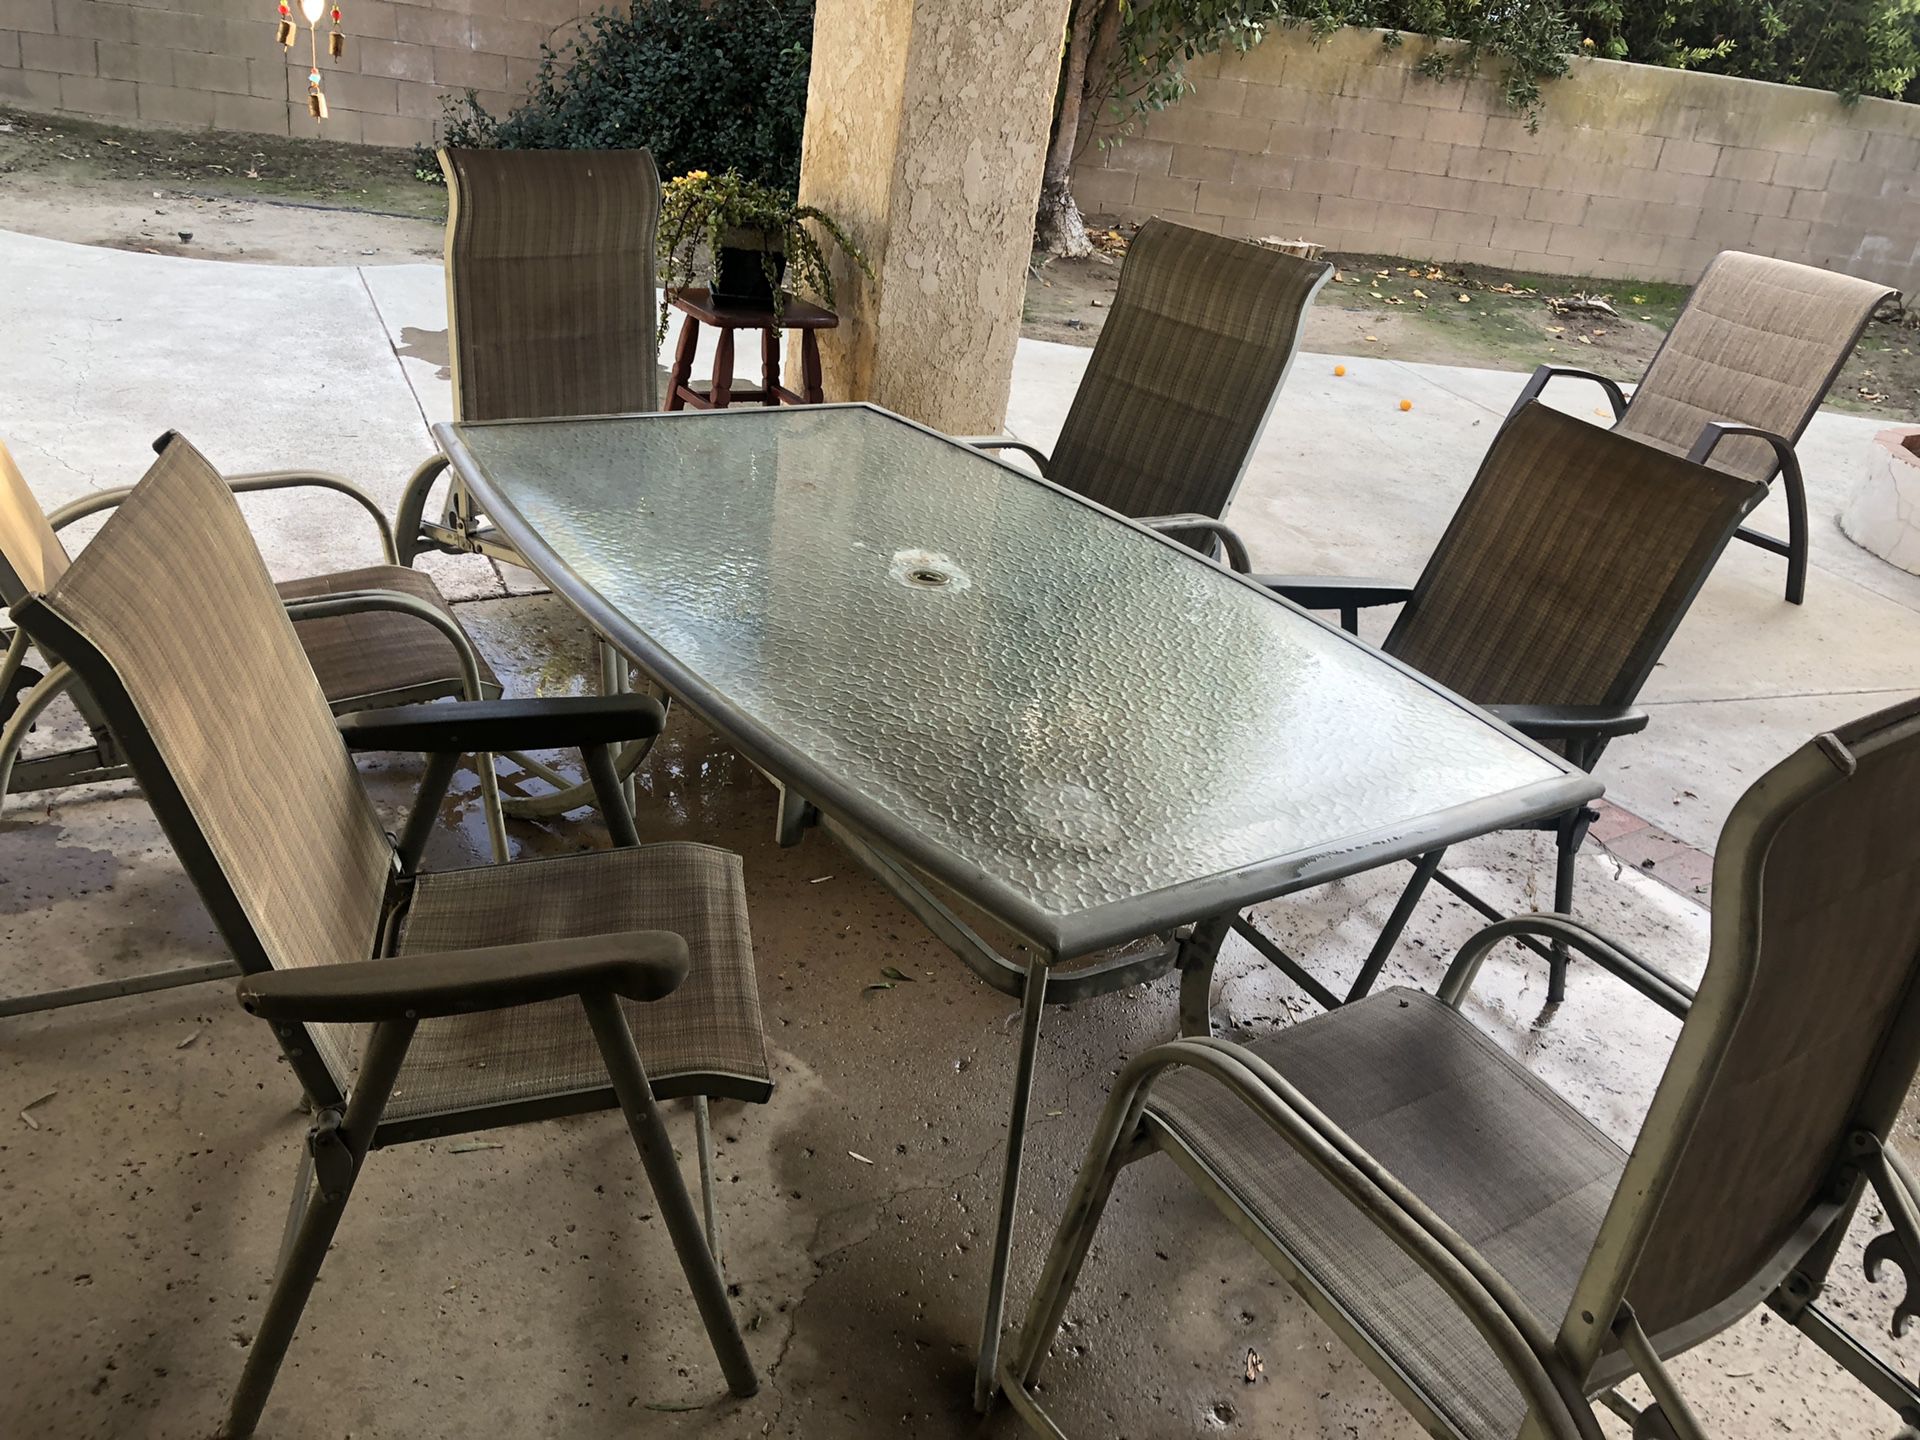 Patio furniture 6 piece chair set with table.